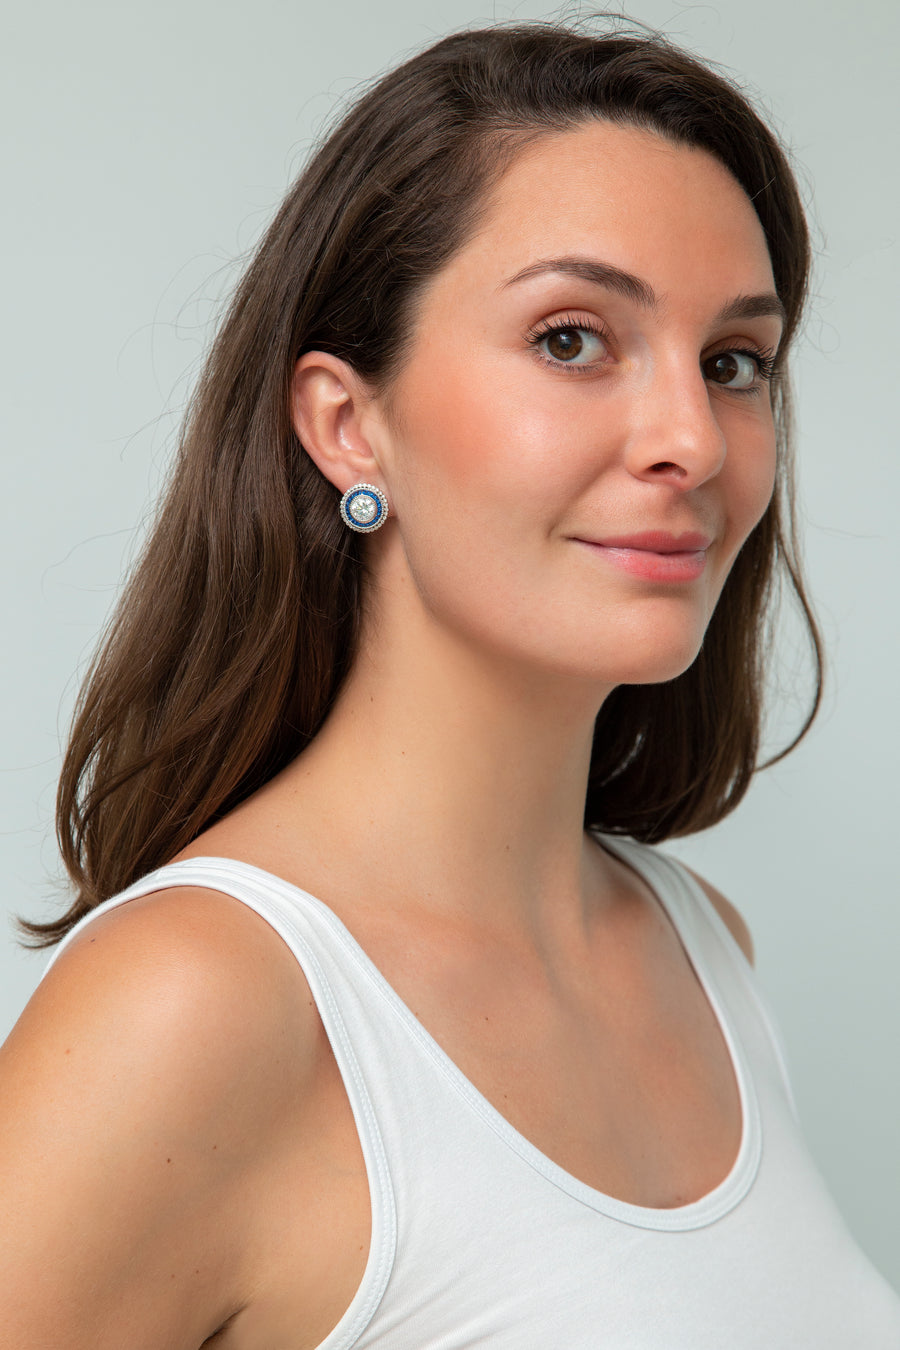 Sparkly Blue and Silver Round Drop Earring with Baroque Pearl